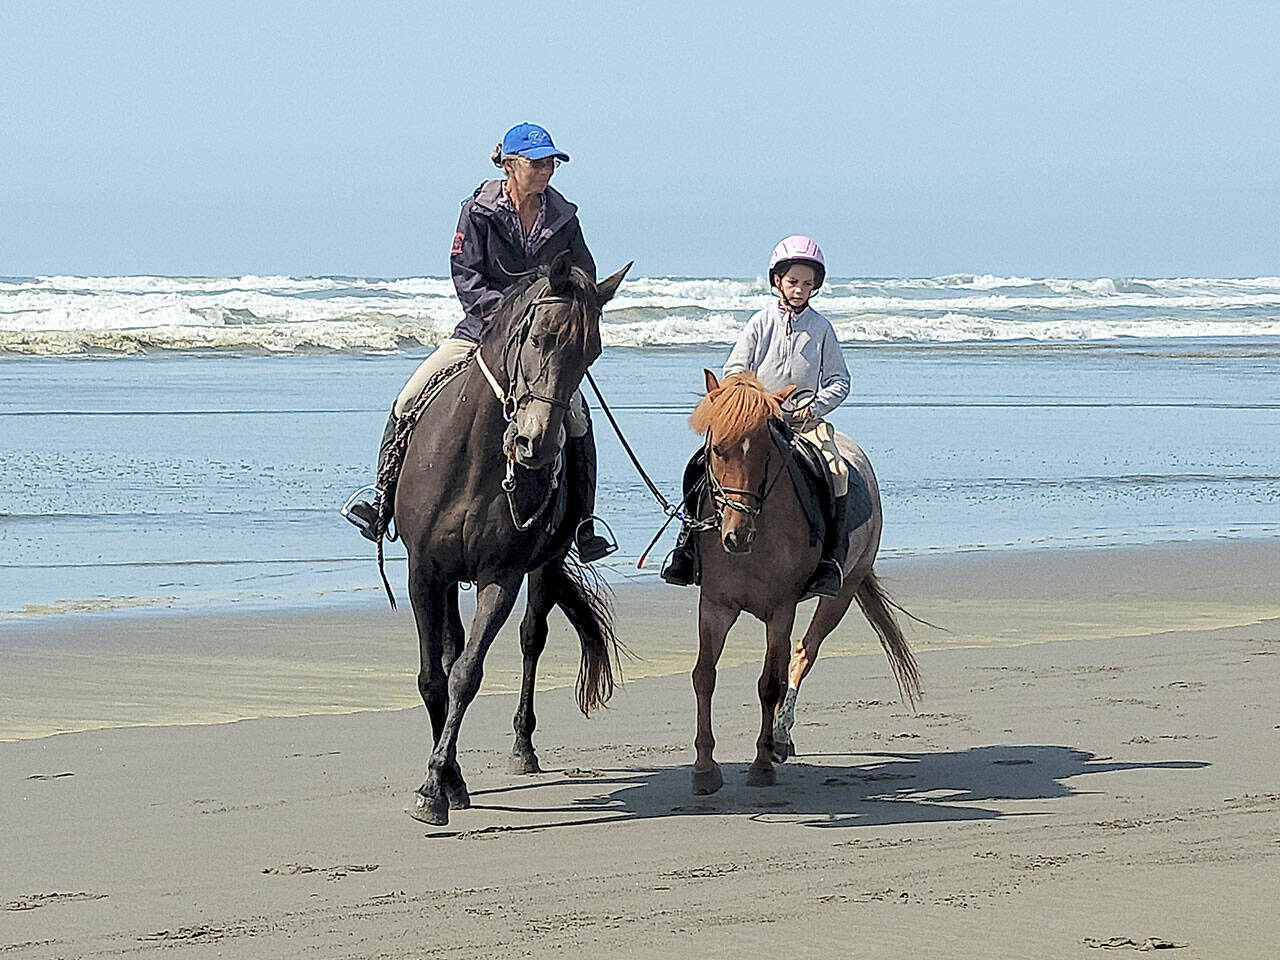 Mary Gallagher helps the younger sister of one her Advanced Hoof Beats students, Daniela Dam, riding Chili Pepper, acclimate to riding on a wide open beach rather than an enclosed arena. (Photo by Kimi Robertson)